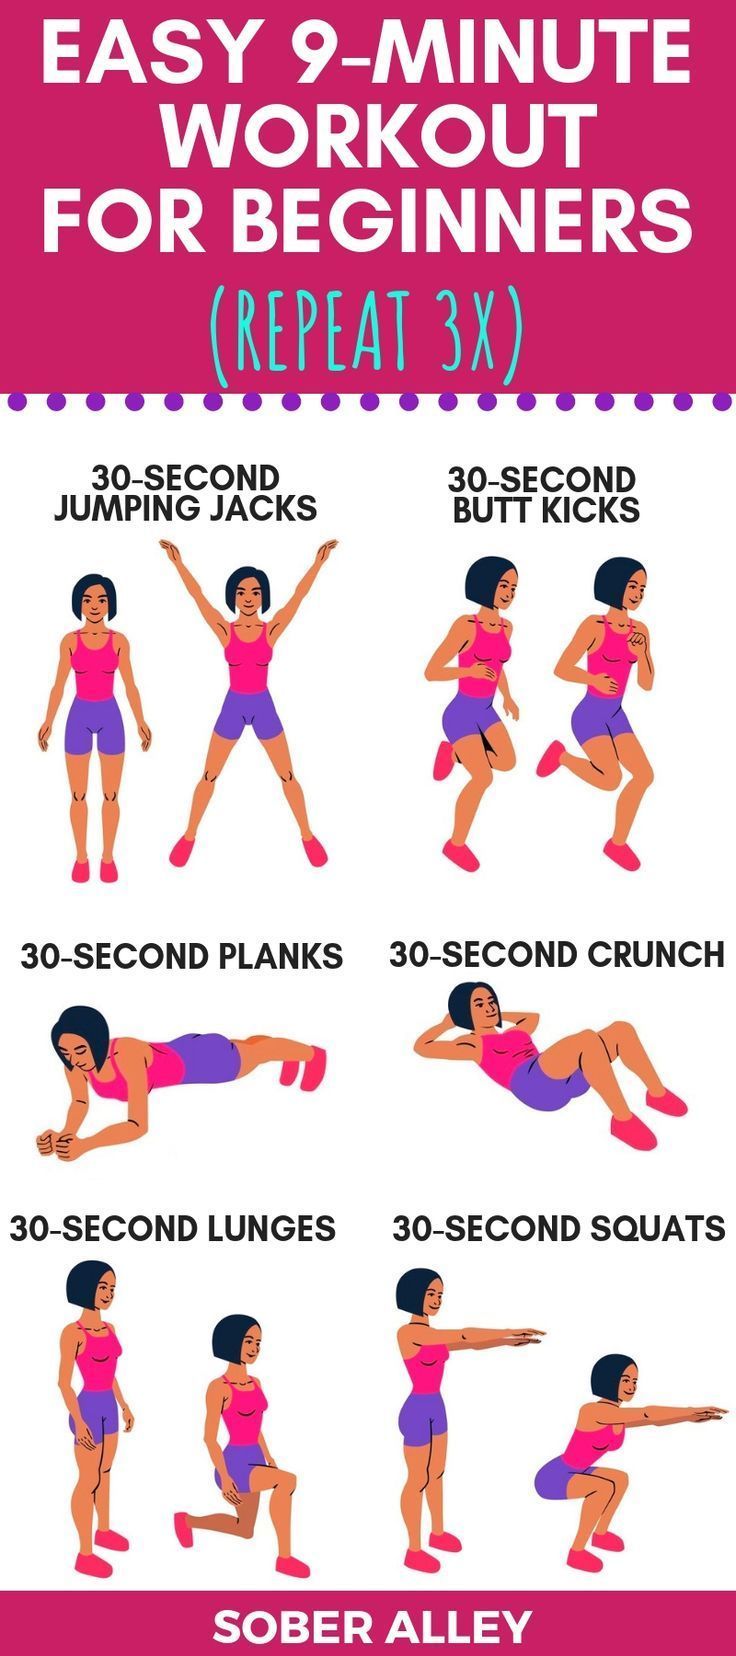 Super Simple 9-Minute Fat Burning Workout For Beginners -   14 fitness Diet workouts ideas